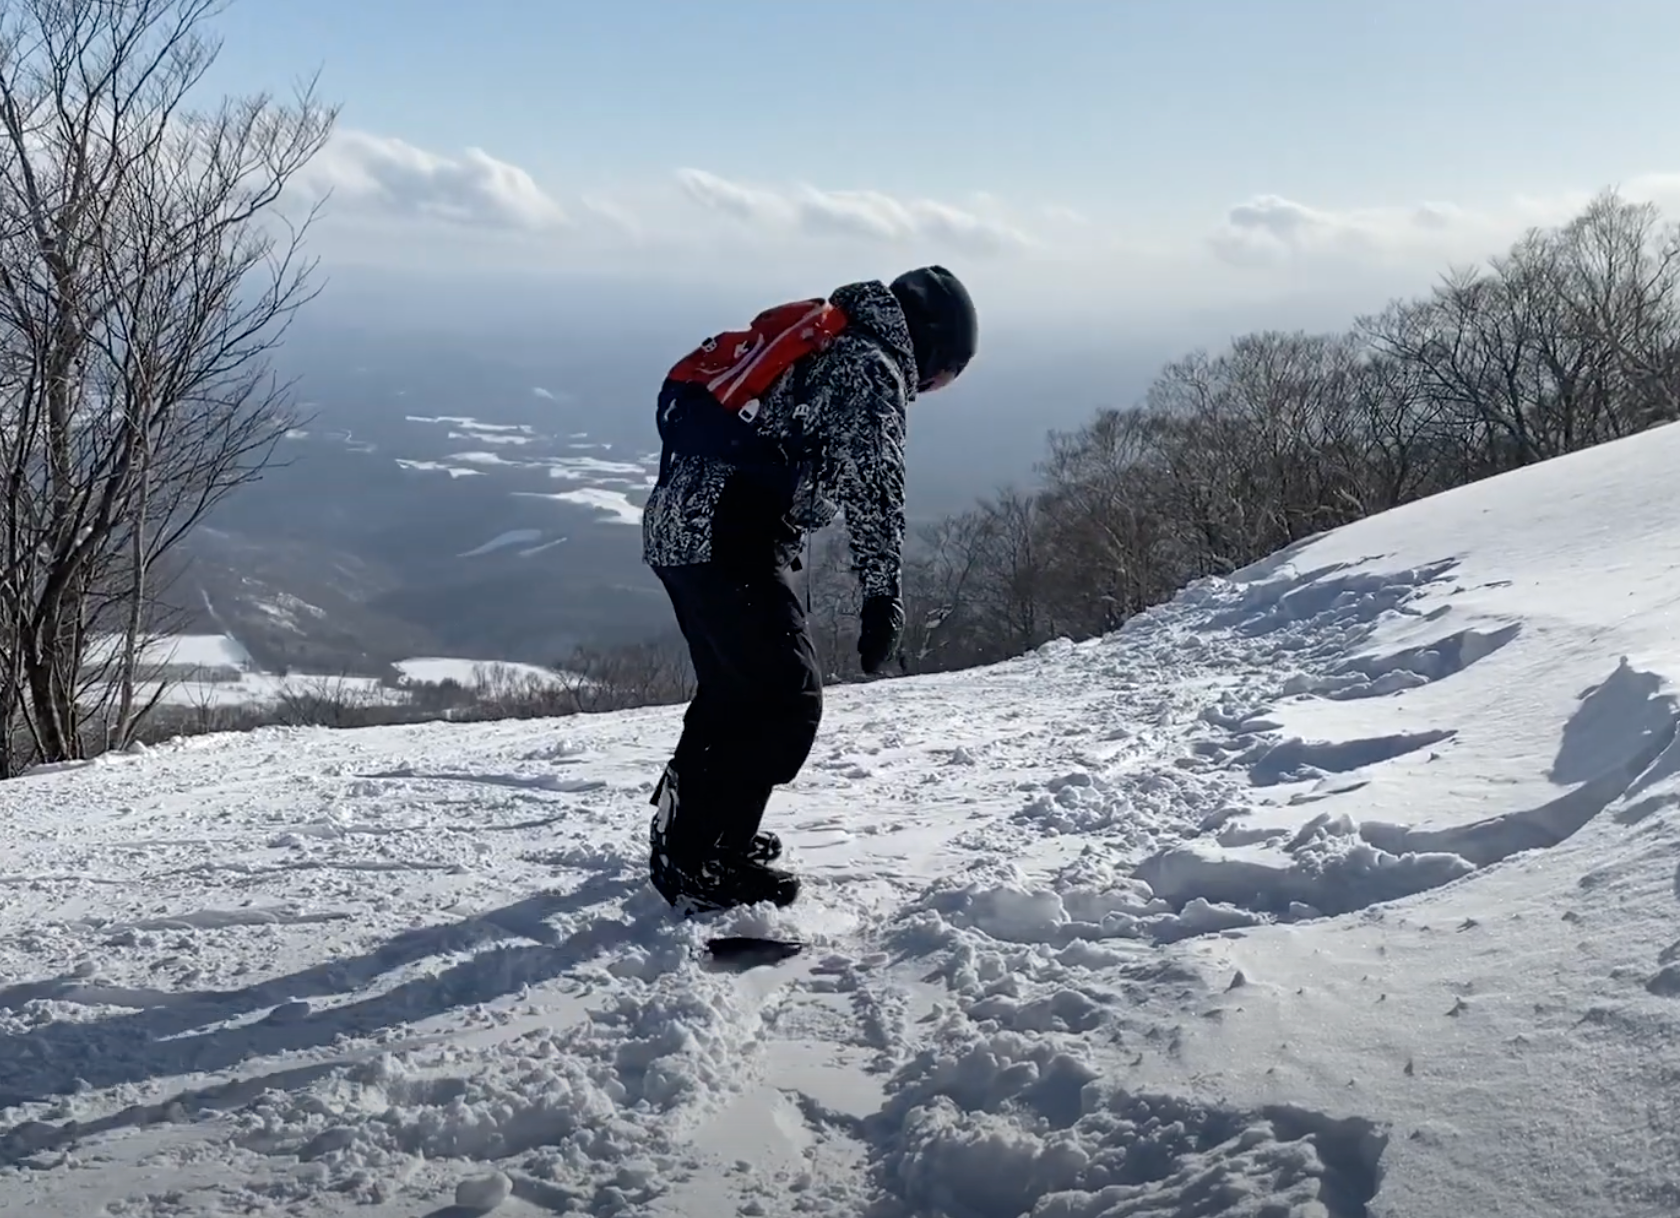 JAPAN // SECOND TRIP HOSTED BY WILLIE B & JAMES POTTER